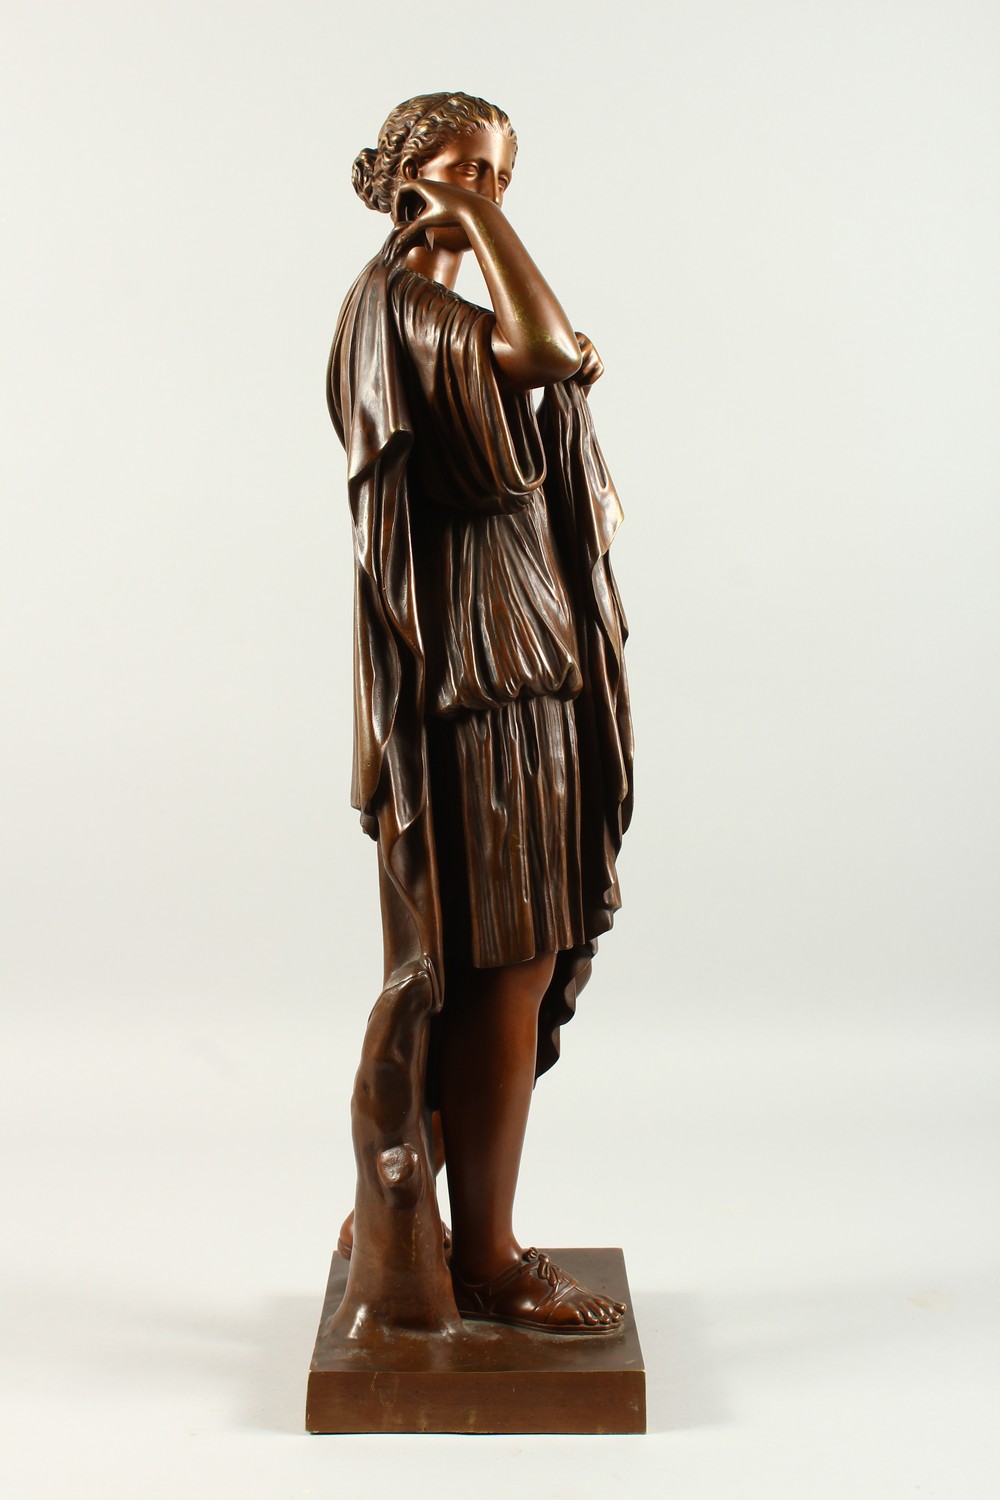 19TH CENTURY ITALIAN SCHOOL. A STANDING BRONZE OF A CLASSICAL LADY on a square base. 68cms high. - Image 7 of 9